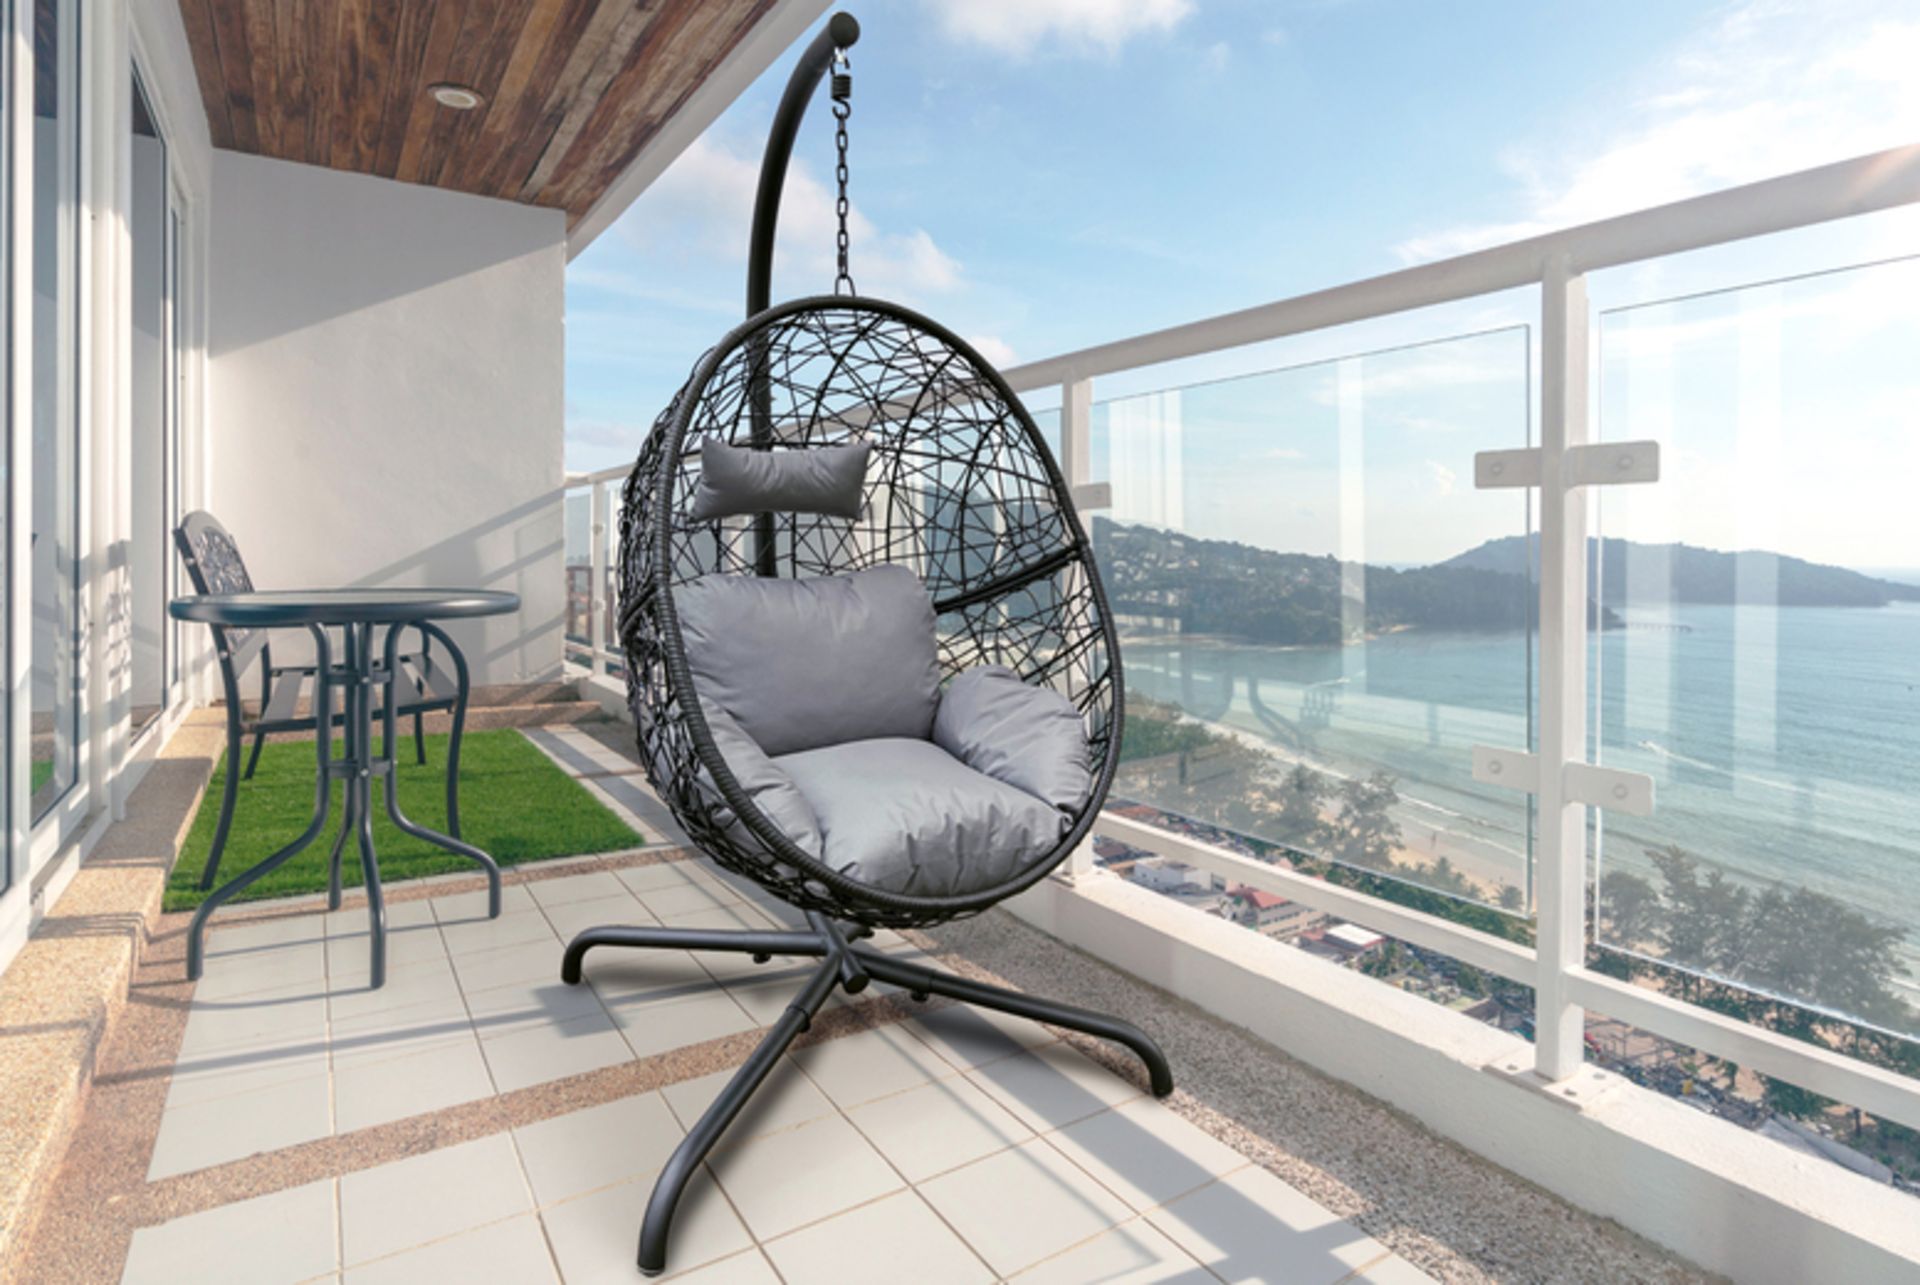 Free Delivery - Job lot of 5 x New Rattan Hanging Egg Chair With A Cushion and Pillow - Black